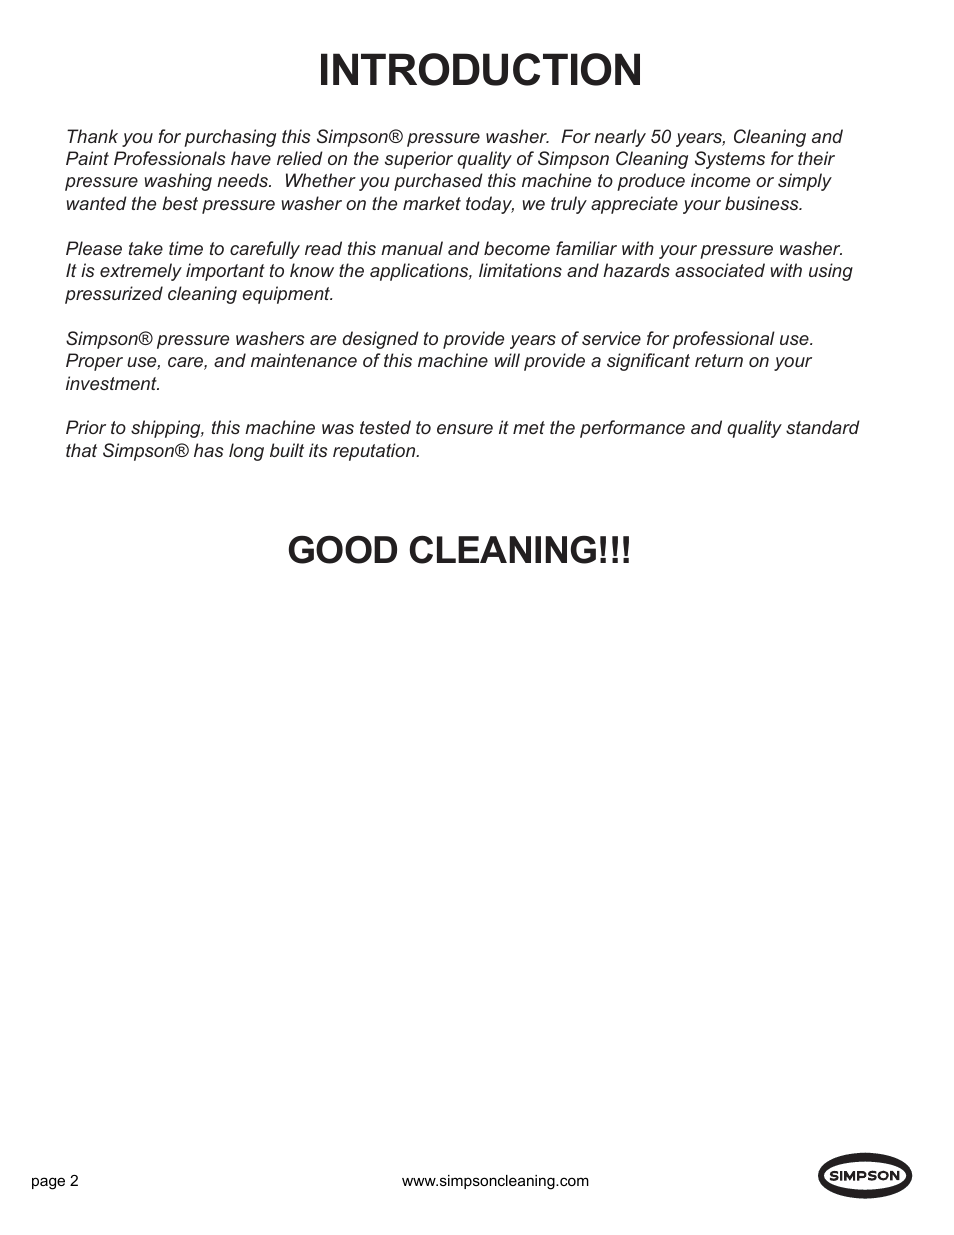 Introduction, Good cleaning | Simpson PS4240H User Manual | Page 2 / 14